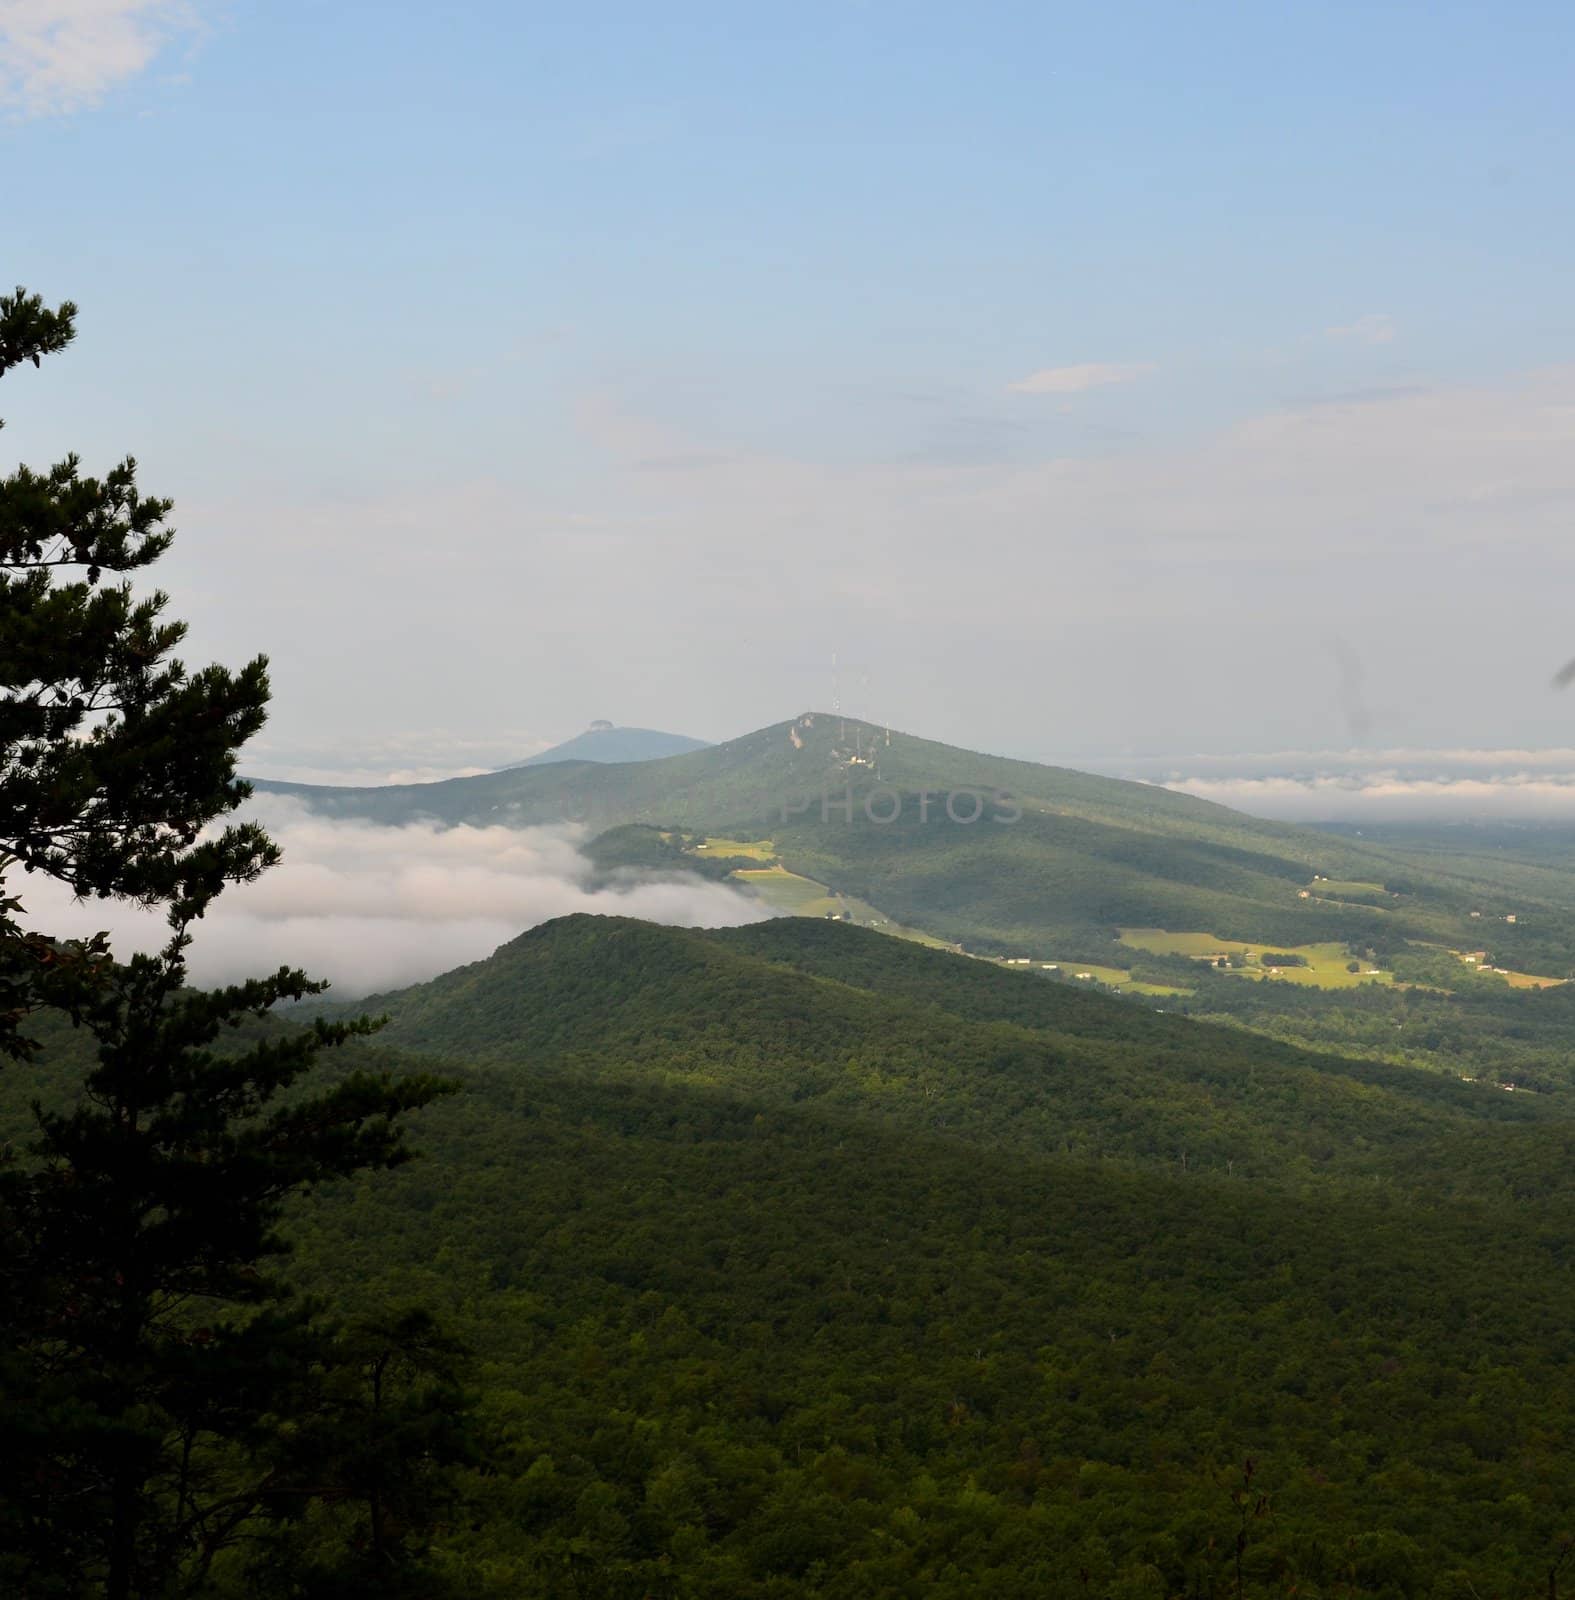 View from the peaks at Hanging Rock State Park in North Carolina